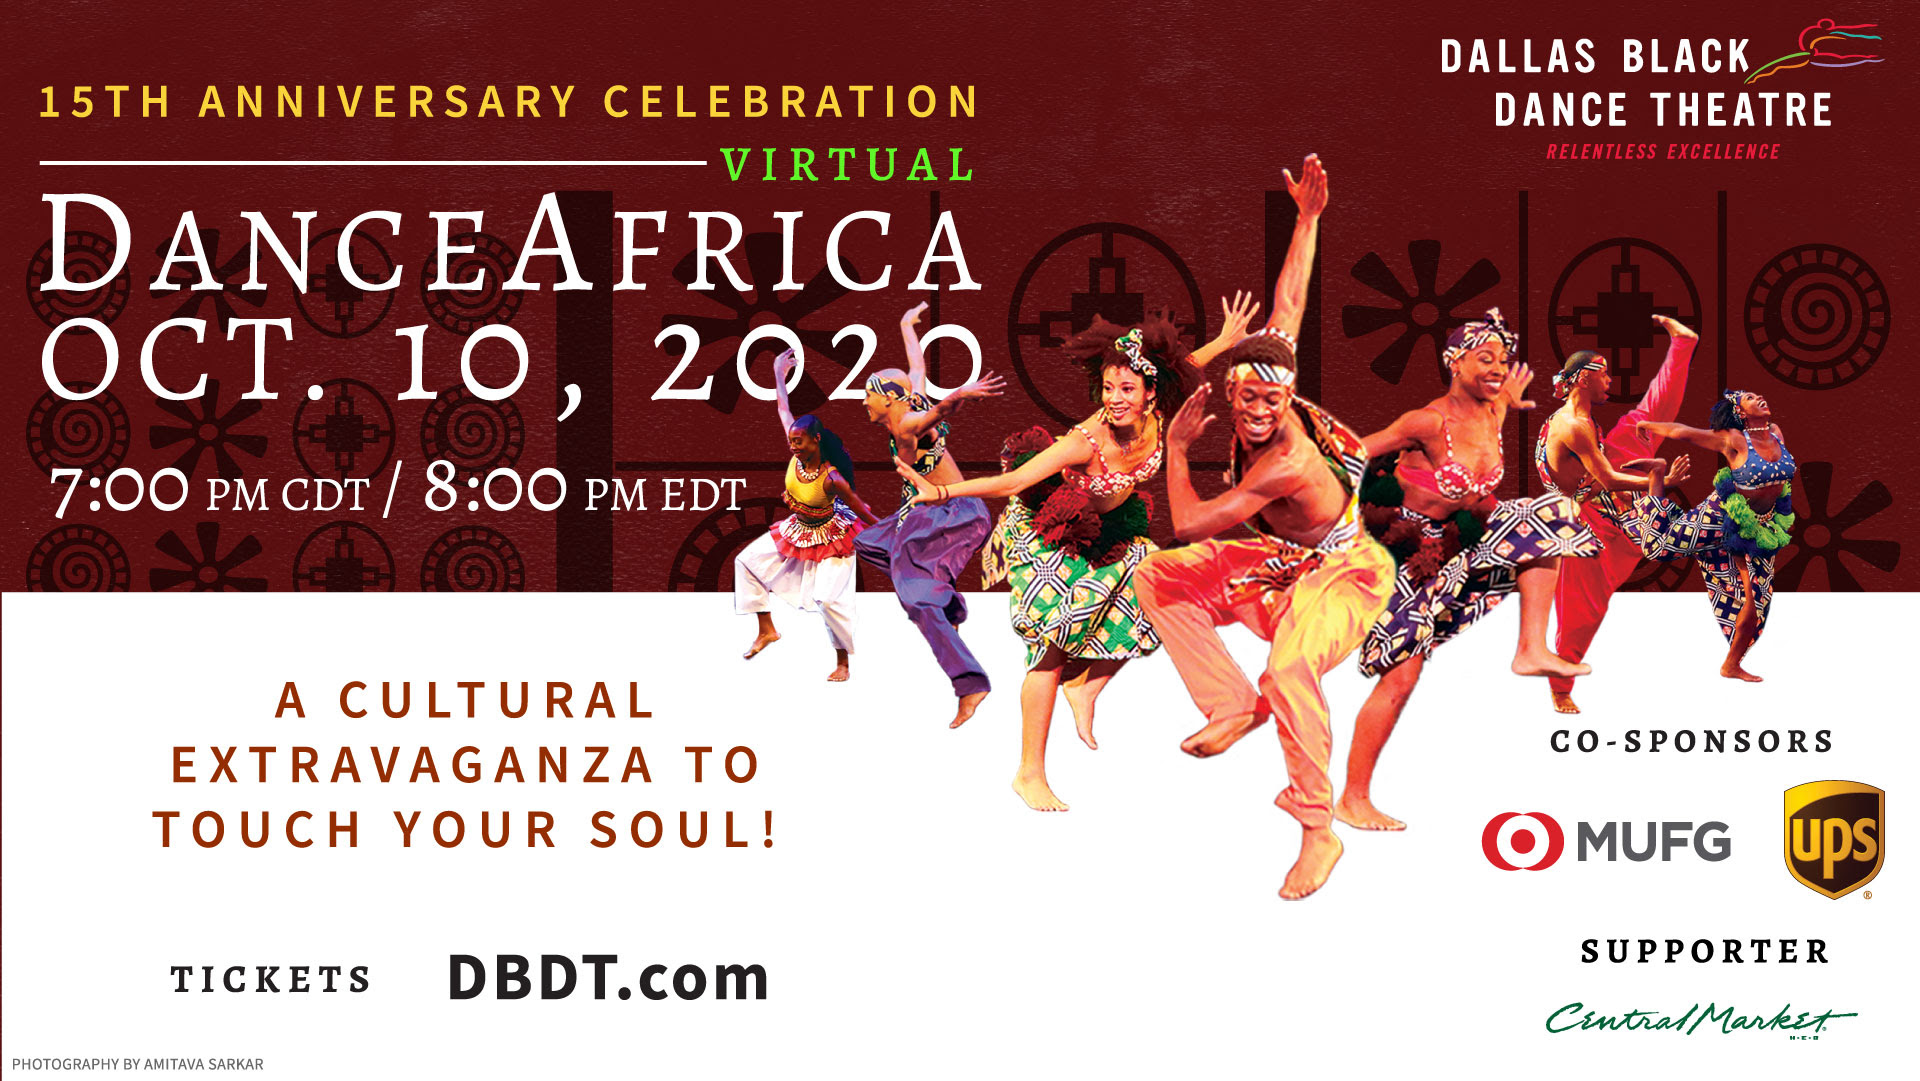 Dallas Black Dance Theatre Celebrates DanceAfrica 15 With Step Afrika! in Virtual Performances Across the Dallas Arts District